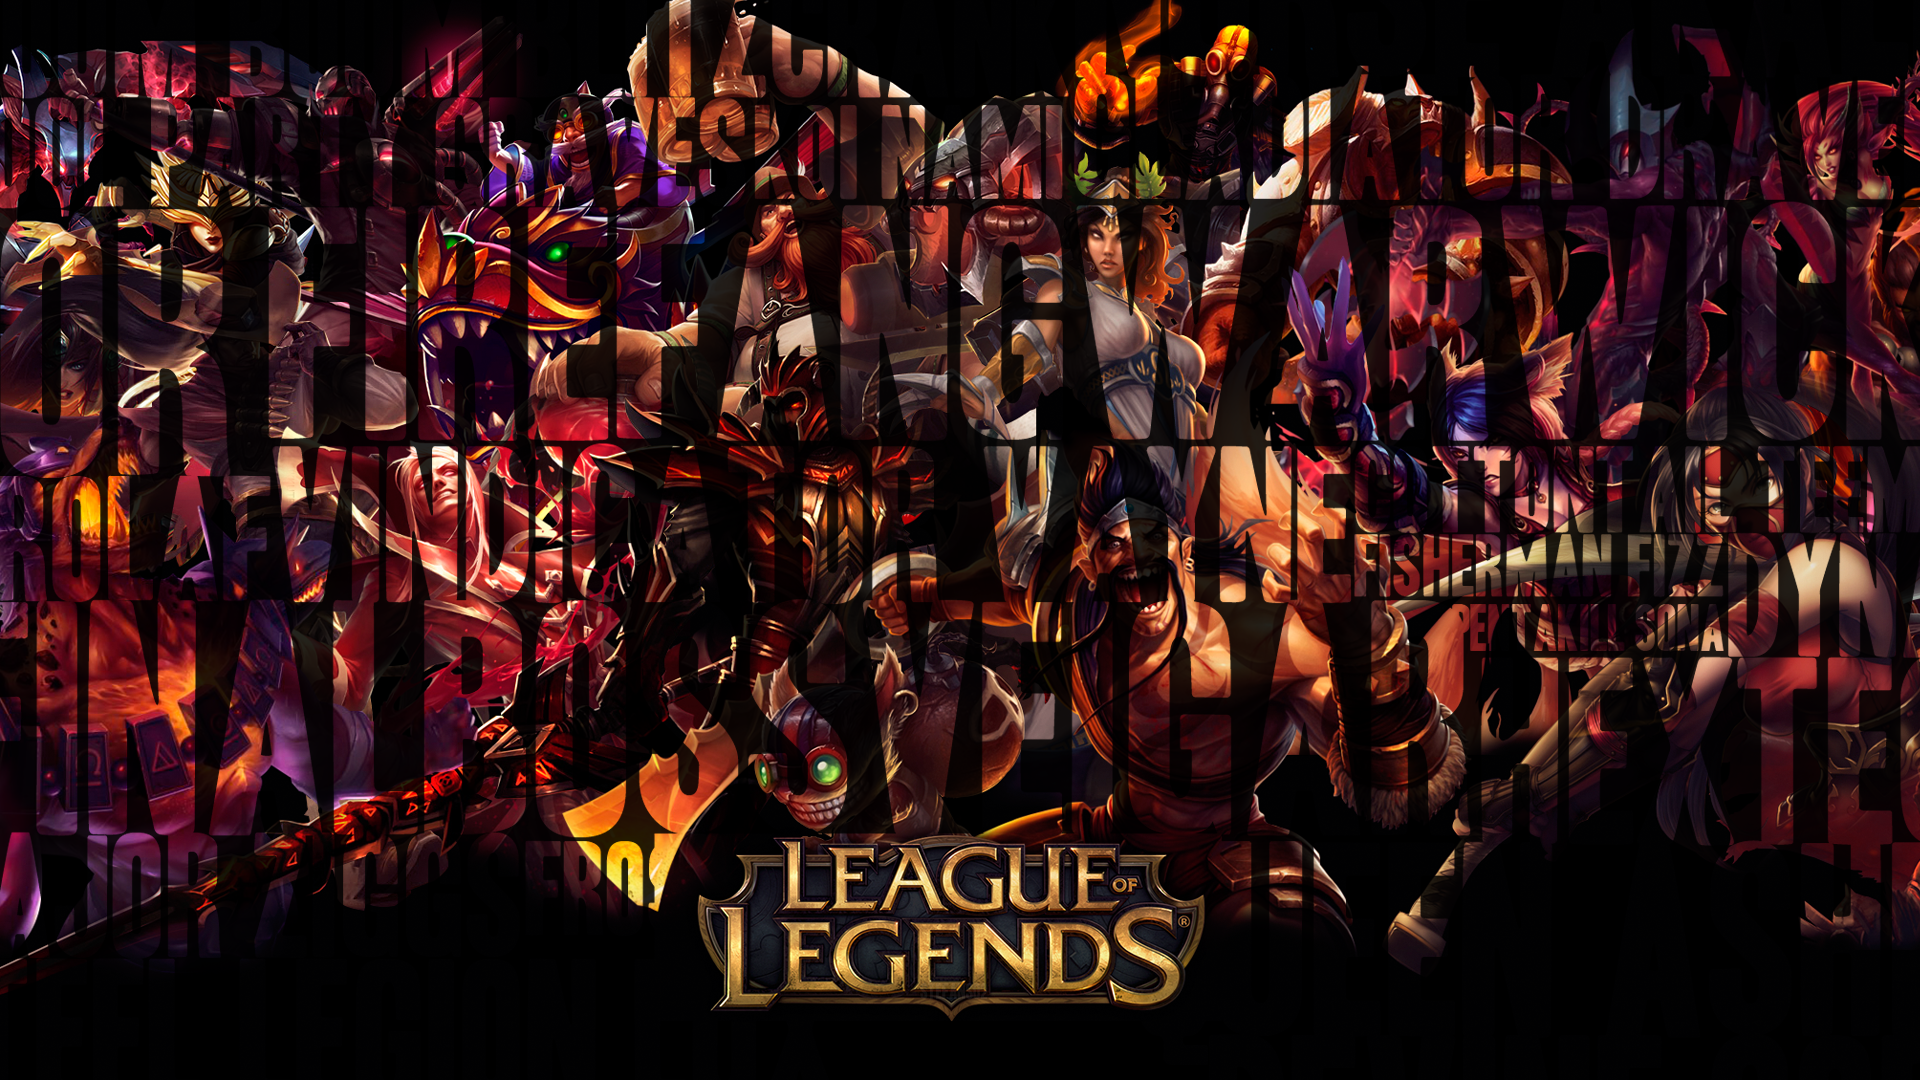 League Of Legends Online Game HD Wallpaper Search More High